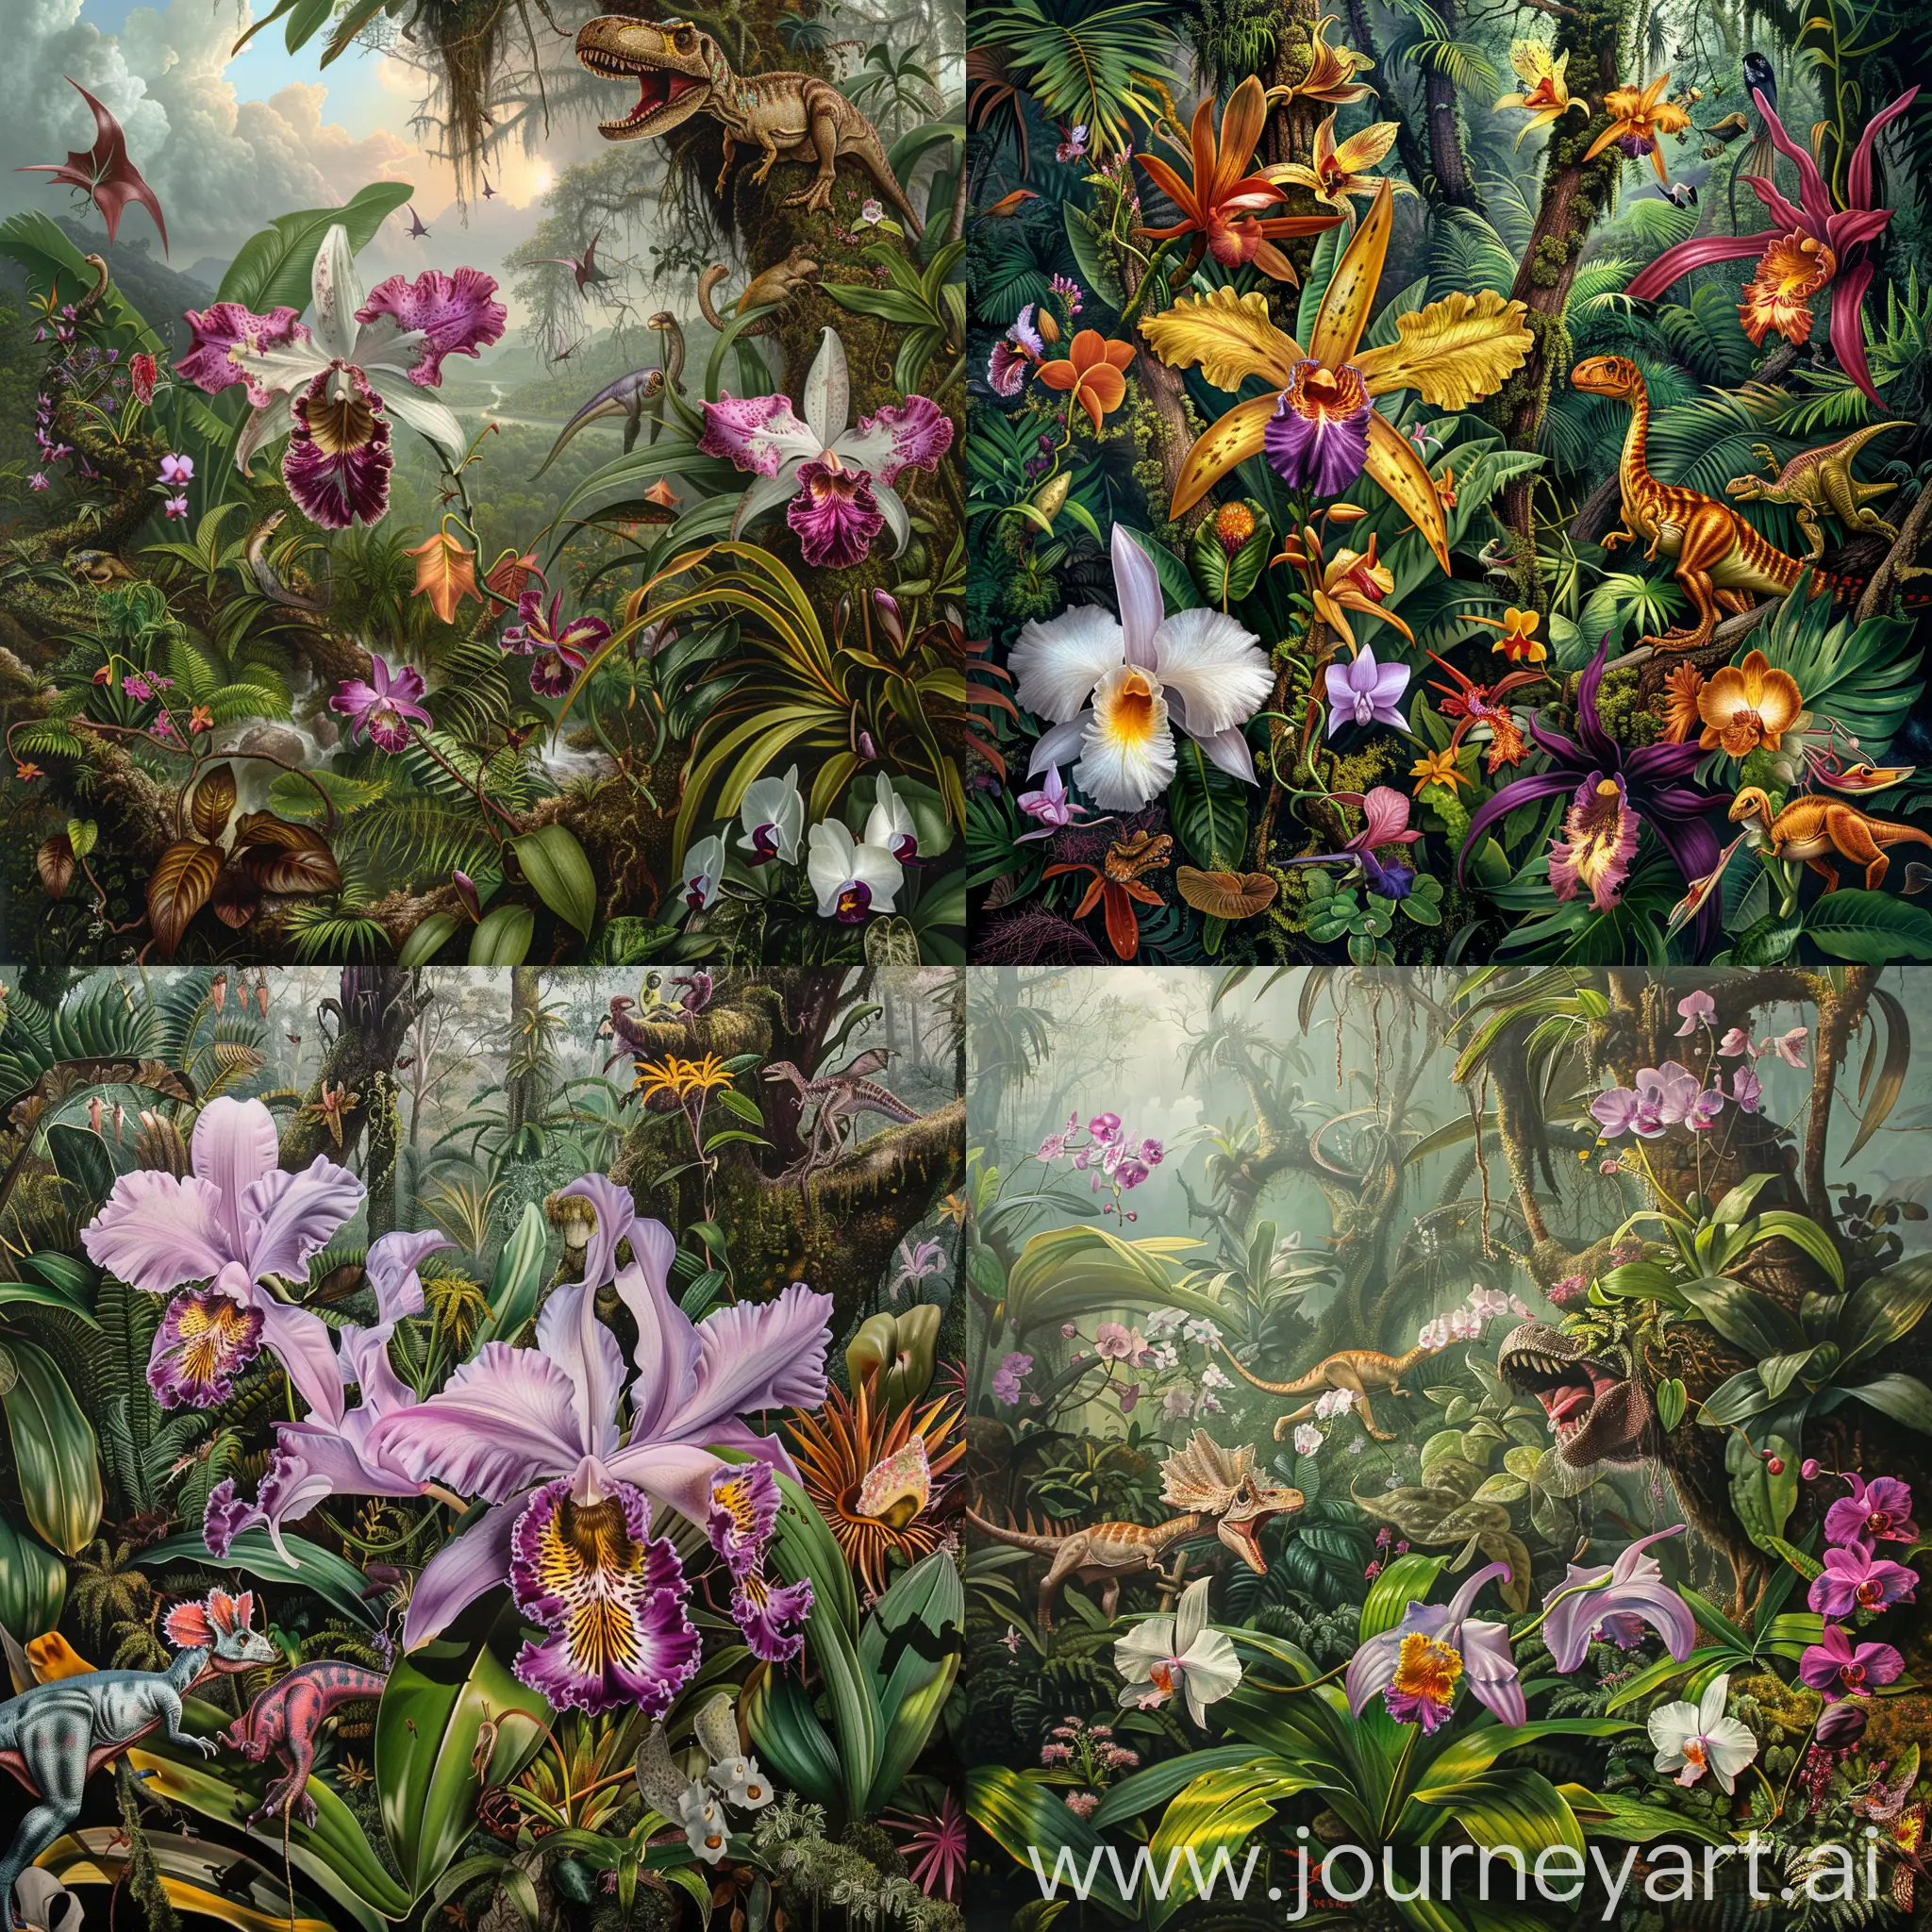 Vibrant-Brazilian-Jungle-with-Orchids-and-Surprising-Wildlife